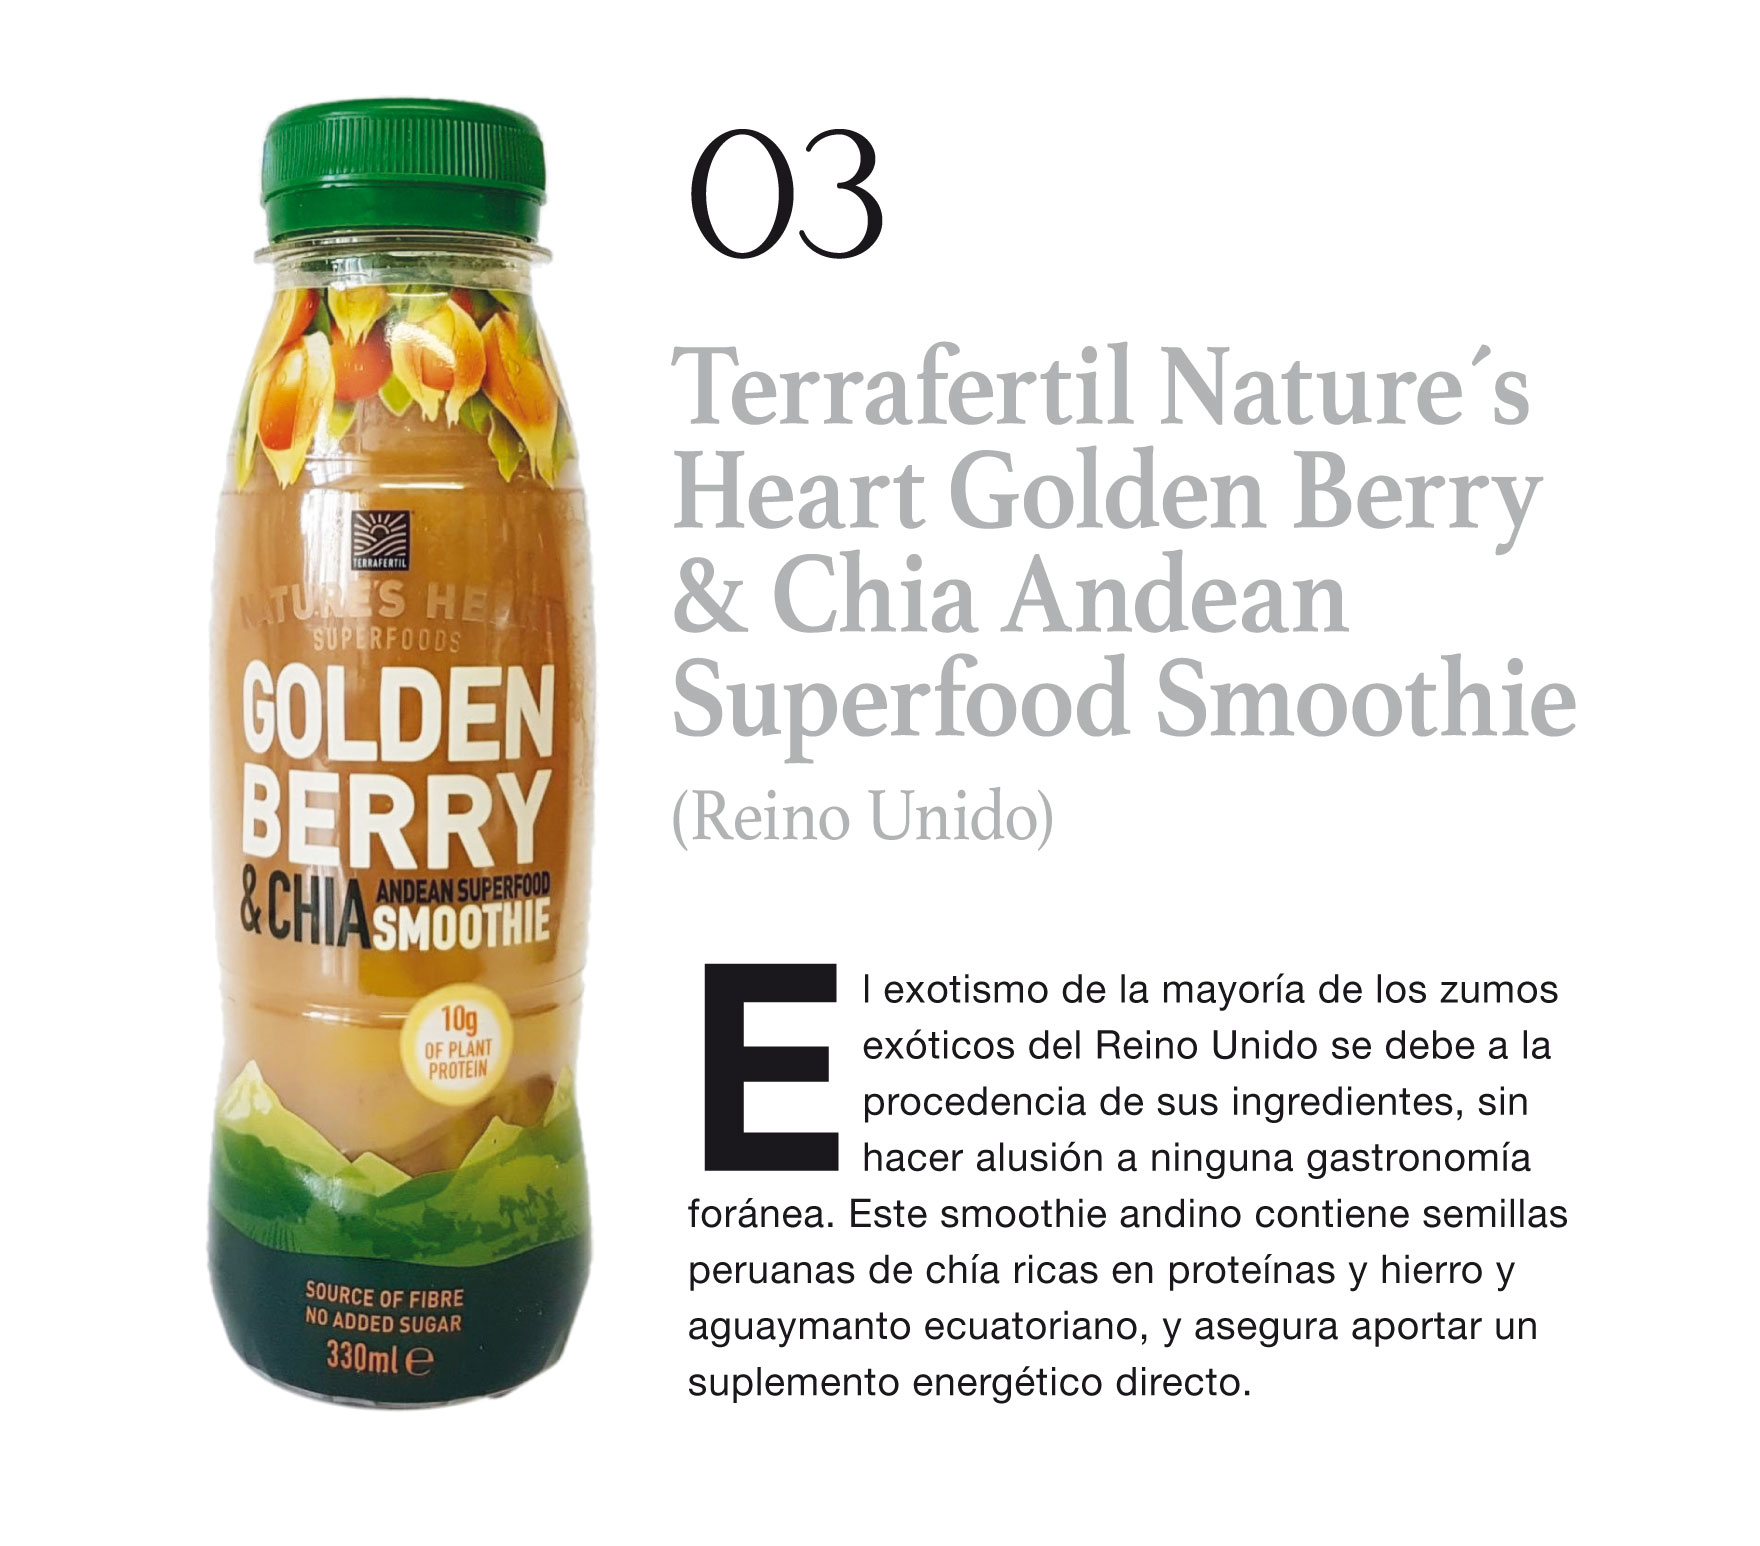 Terrafertil Nature's Heart Golden Berry & Chia Andean Superfood Smoothie (Reino Unido)